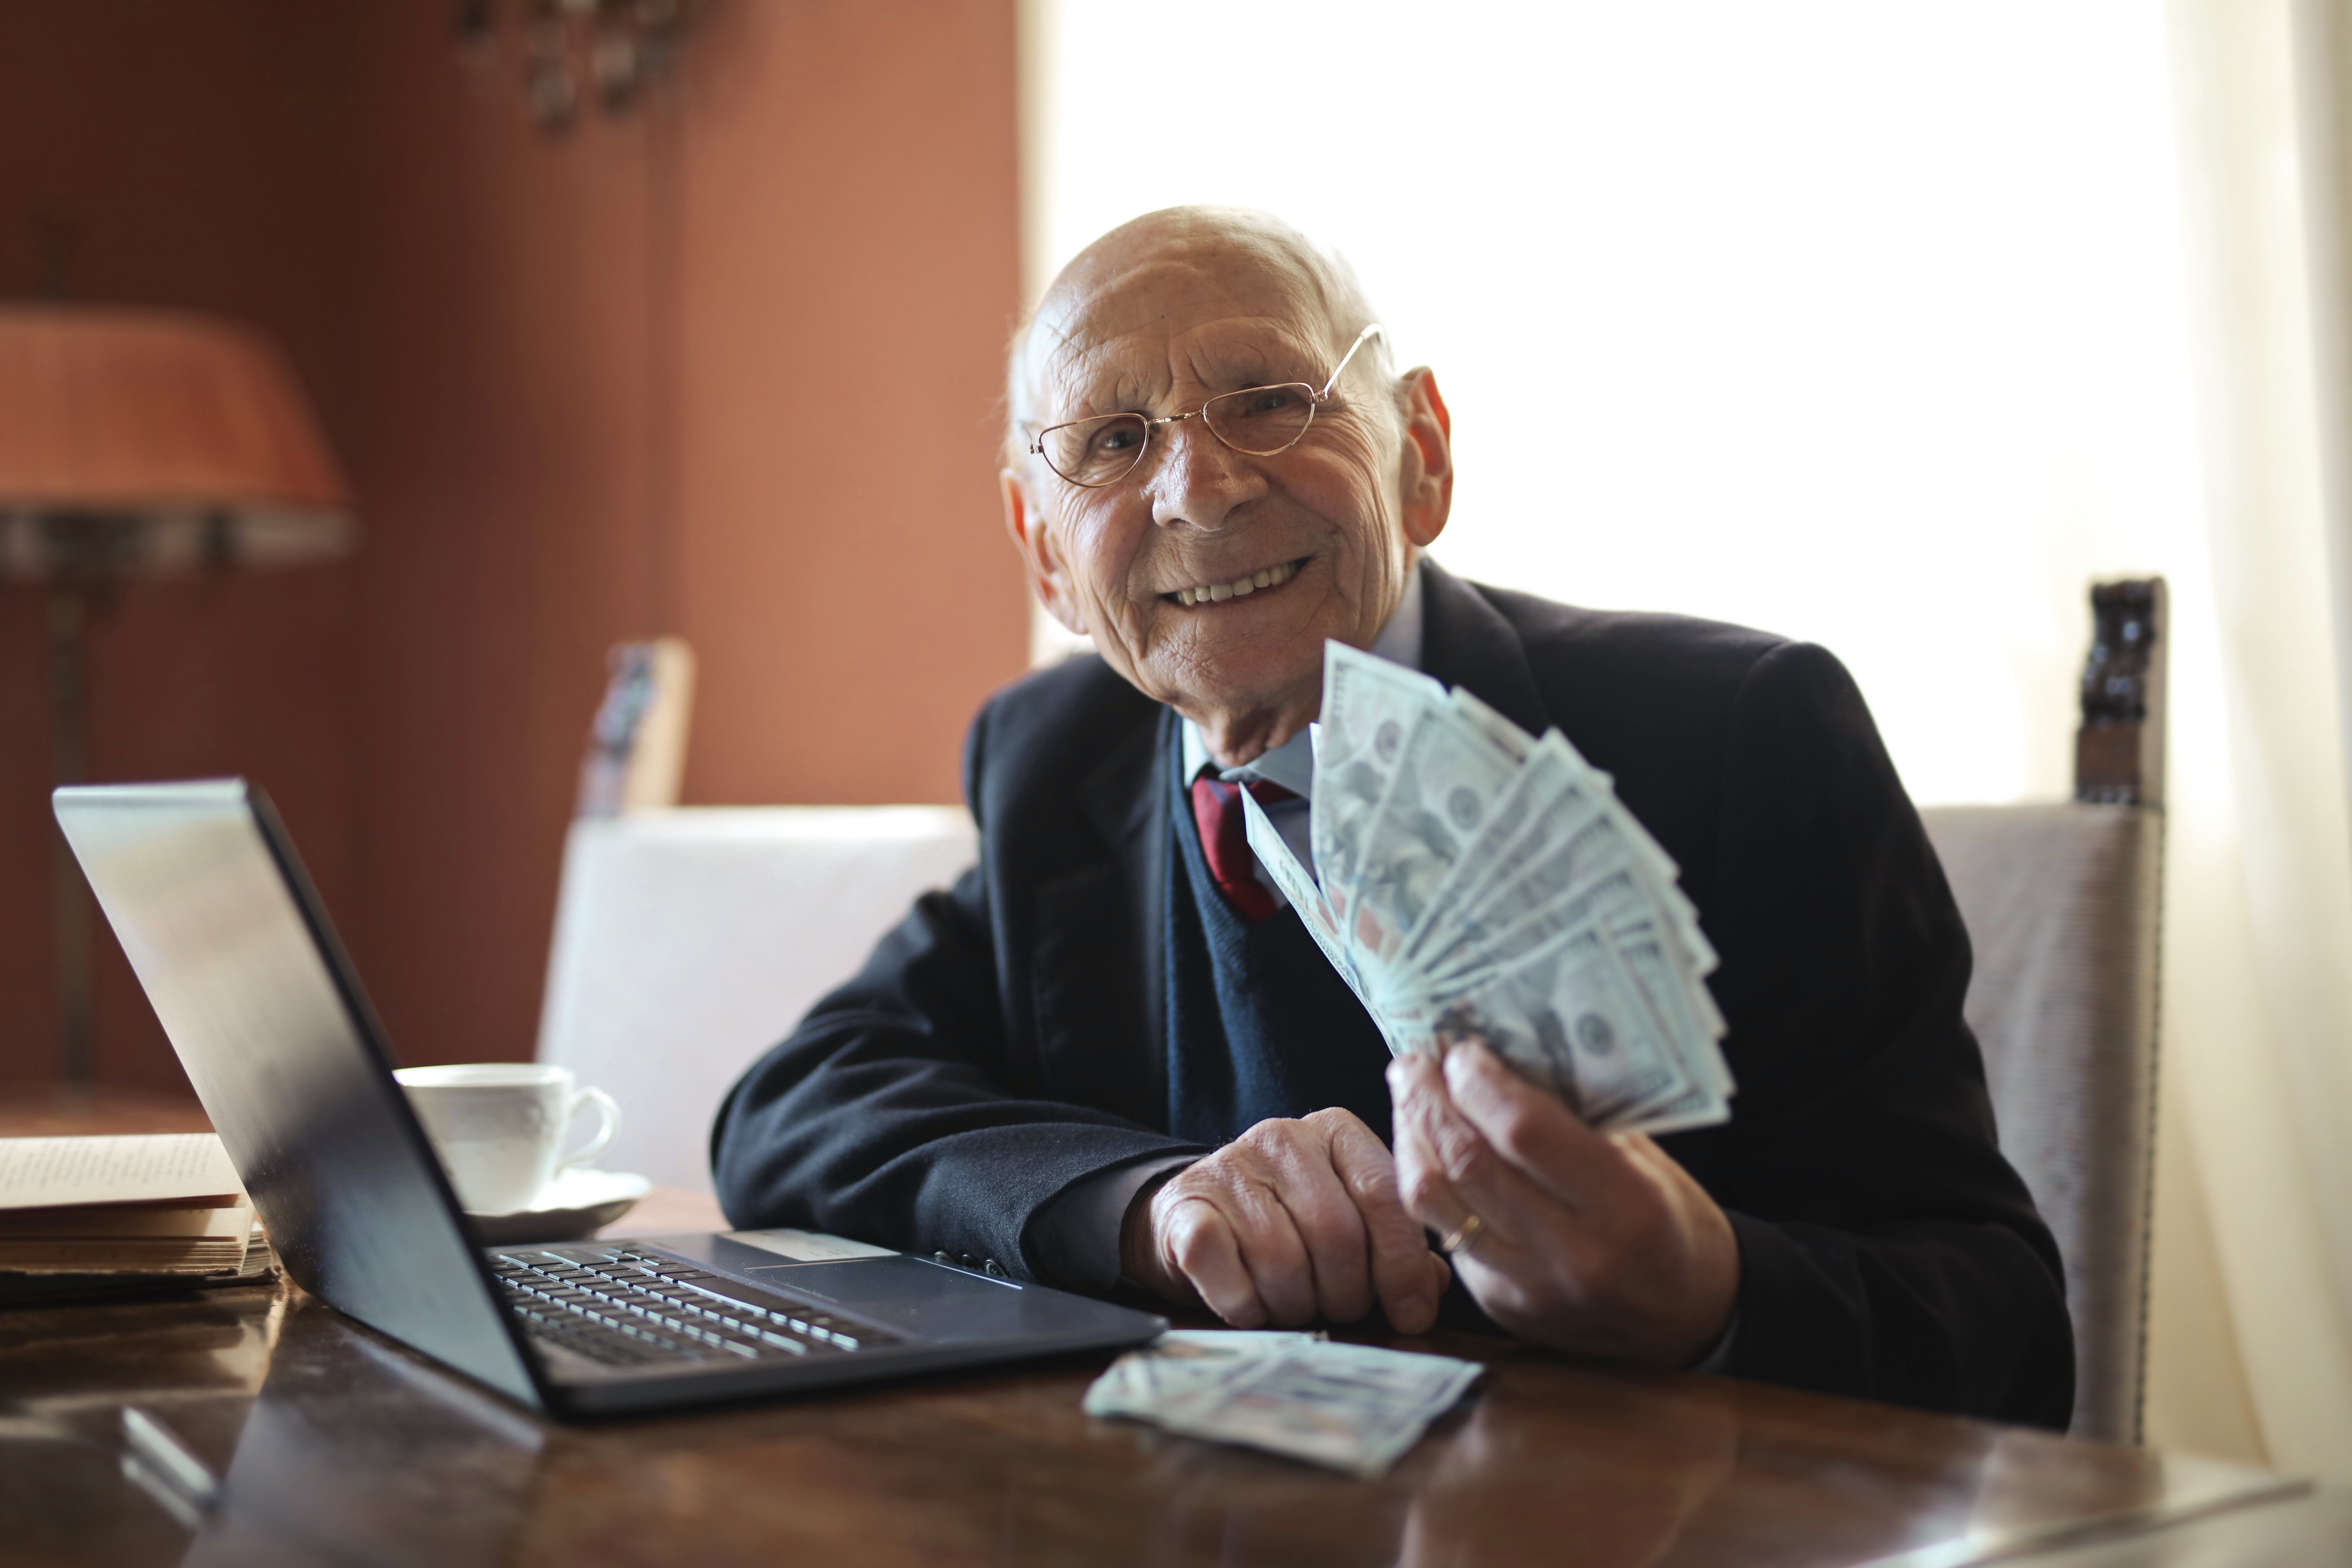 An elderly man smiling while holding money. | Source: Pexels